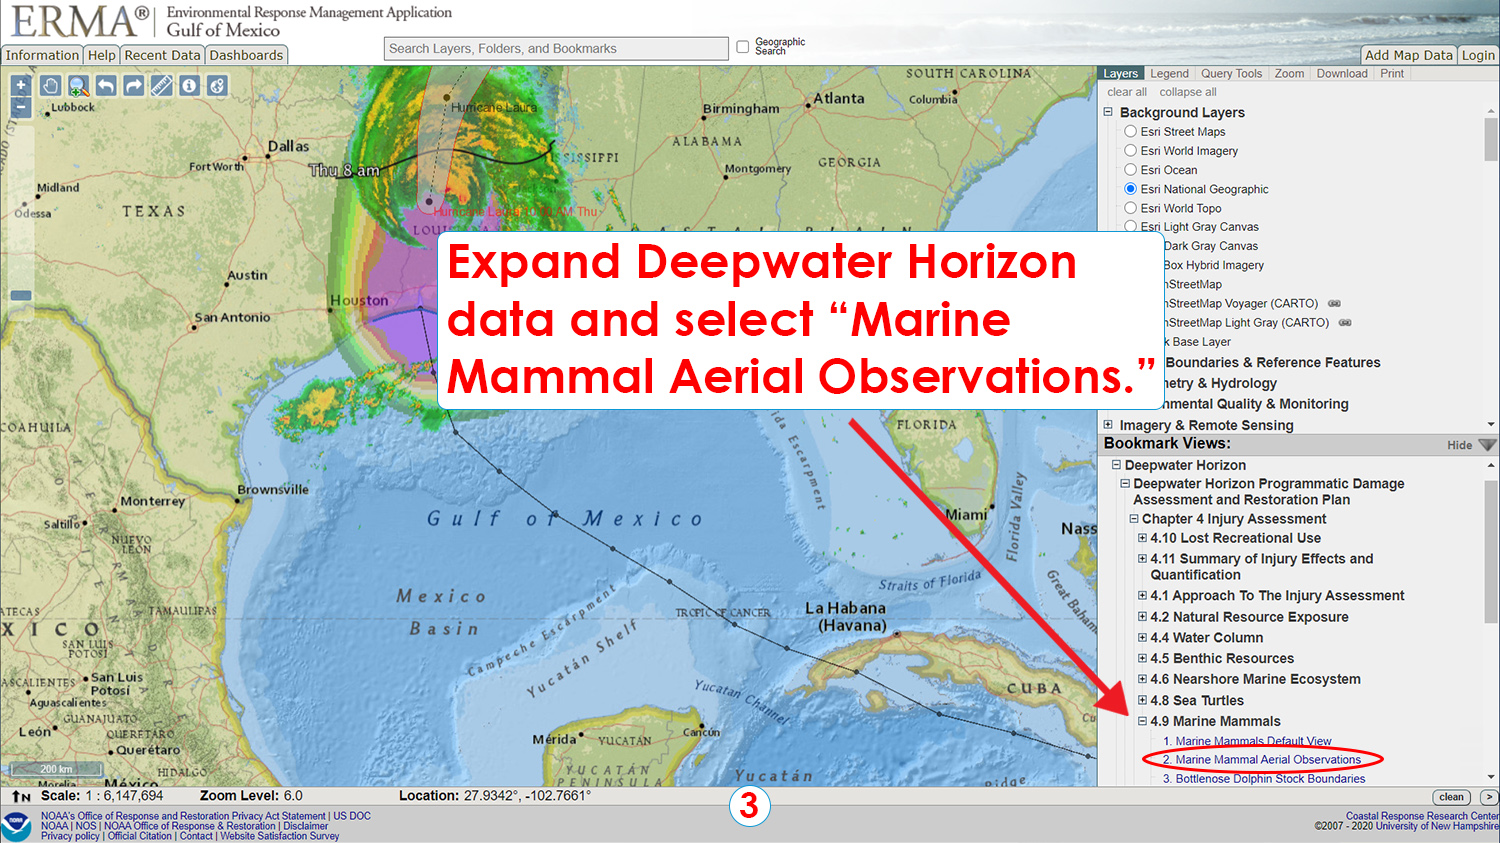 Step 3: Expand Deepwater Horizon data and select "Marine Mammal Aerial Observations."